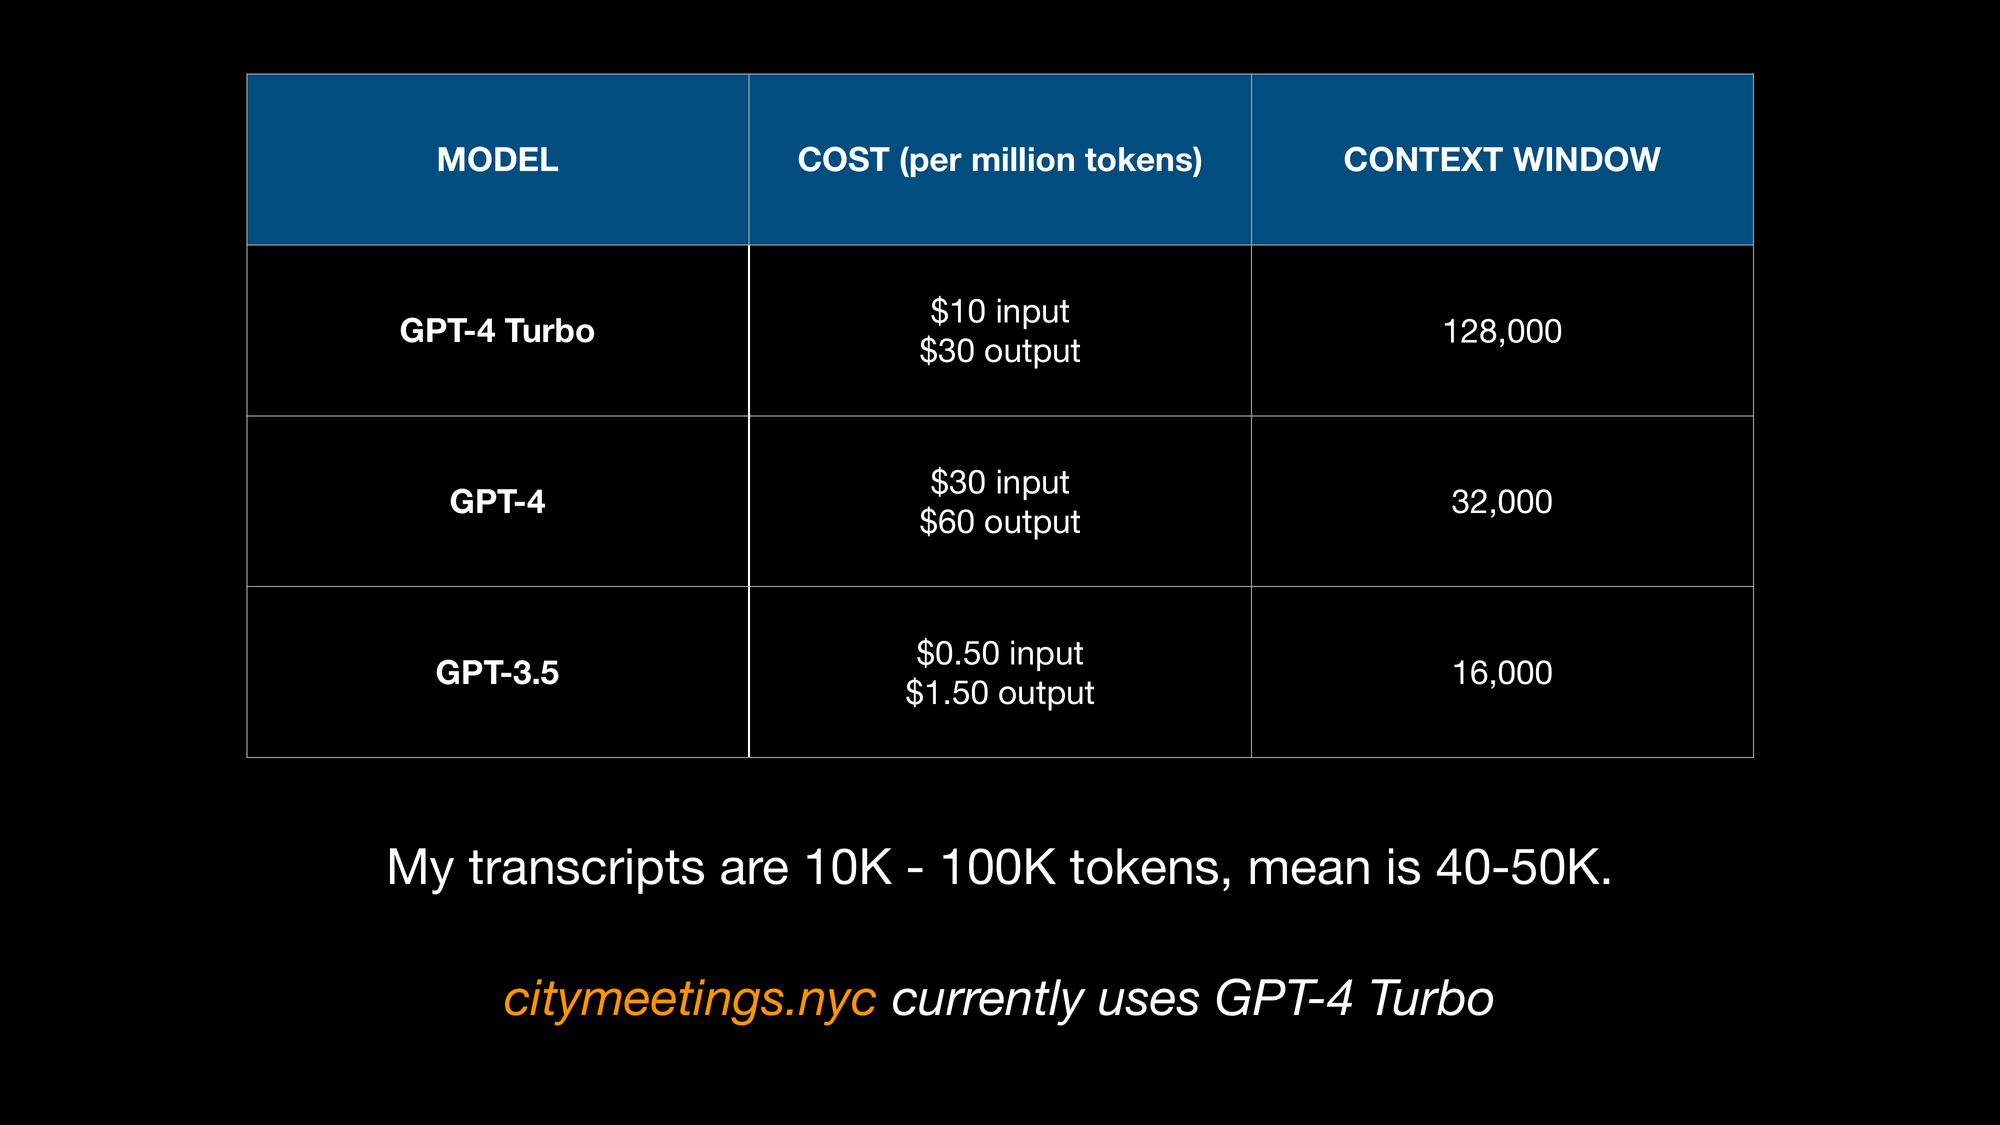 A table of three of OpenAIs models, GPT-4 Turbo, GPT-4, and GPT-3.5. The table shows cost and context window size. The slide also states: My transcripts are 10K - 100K tokens, mean is 40-50K. citymeetings.nyc currently uses GPT-4 Turbo